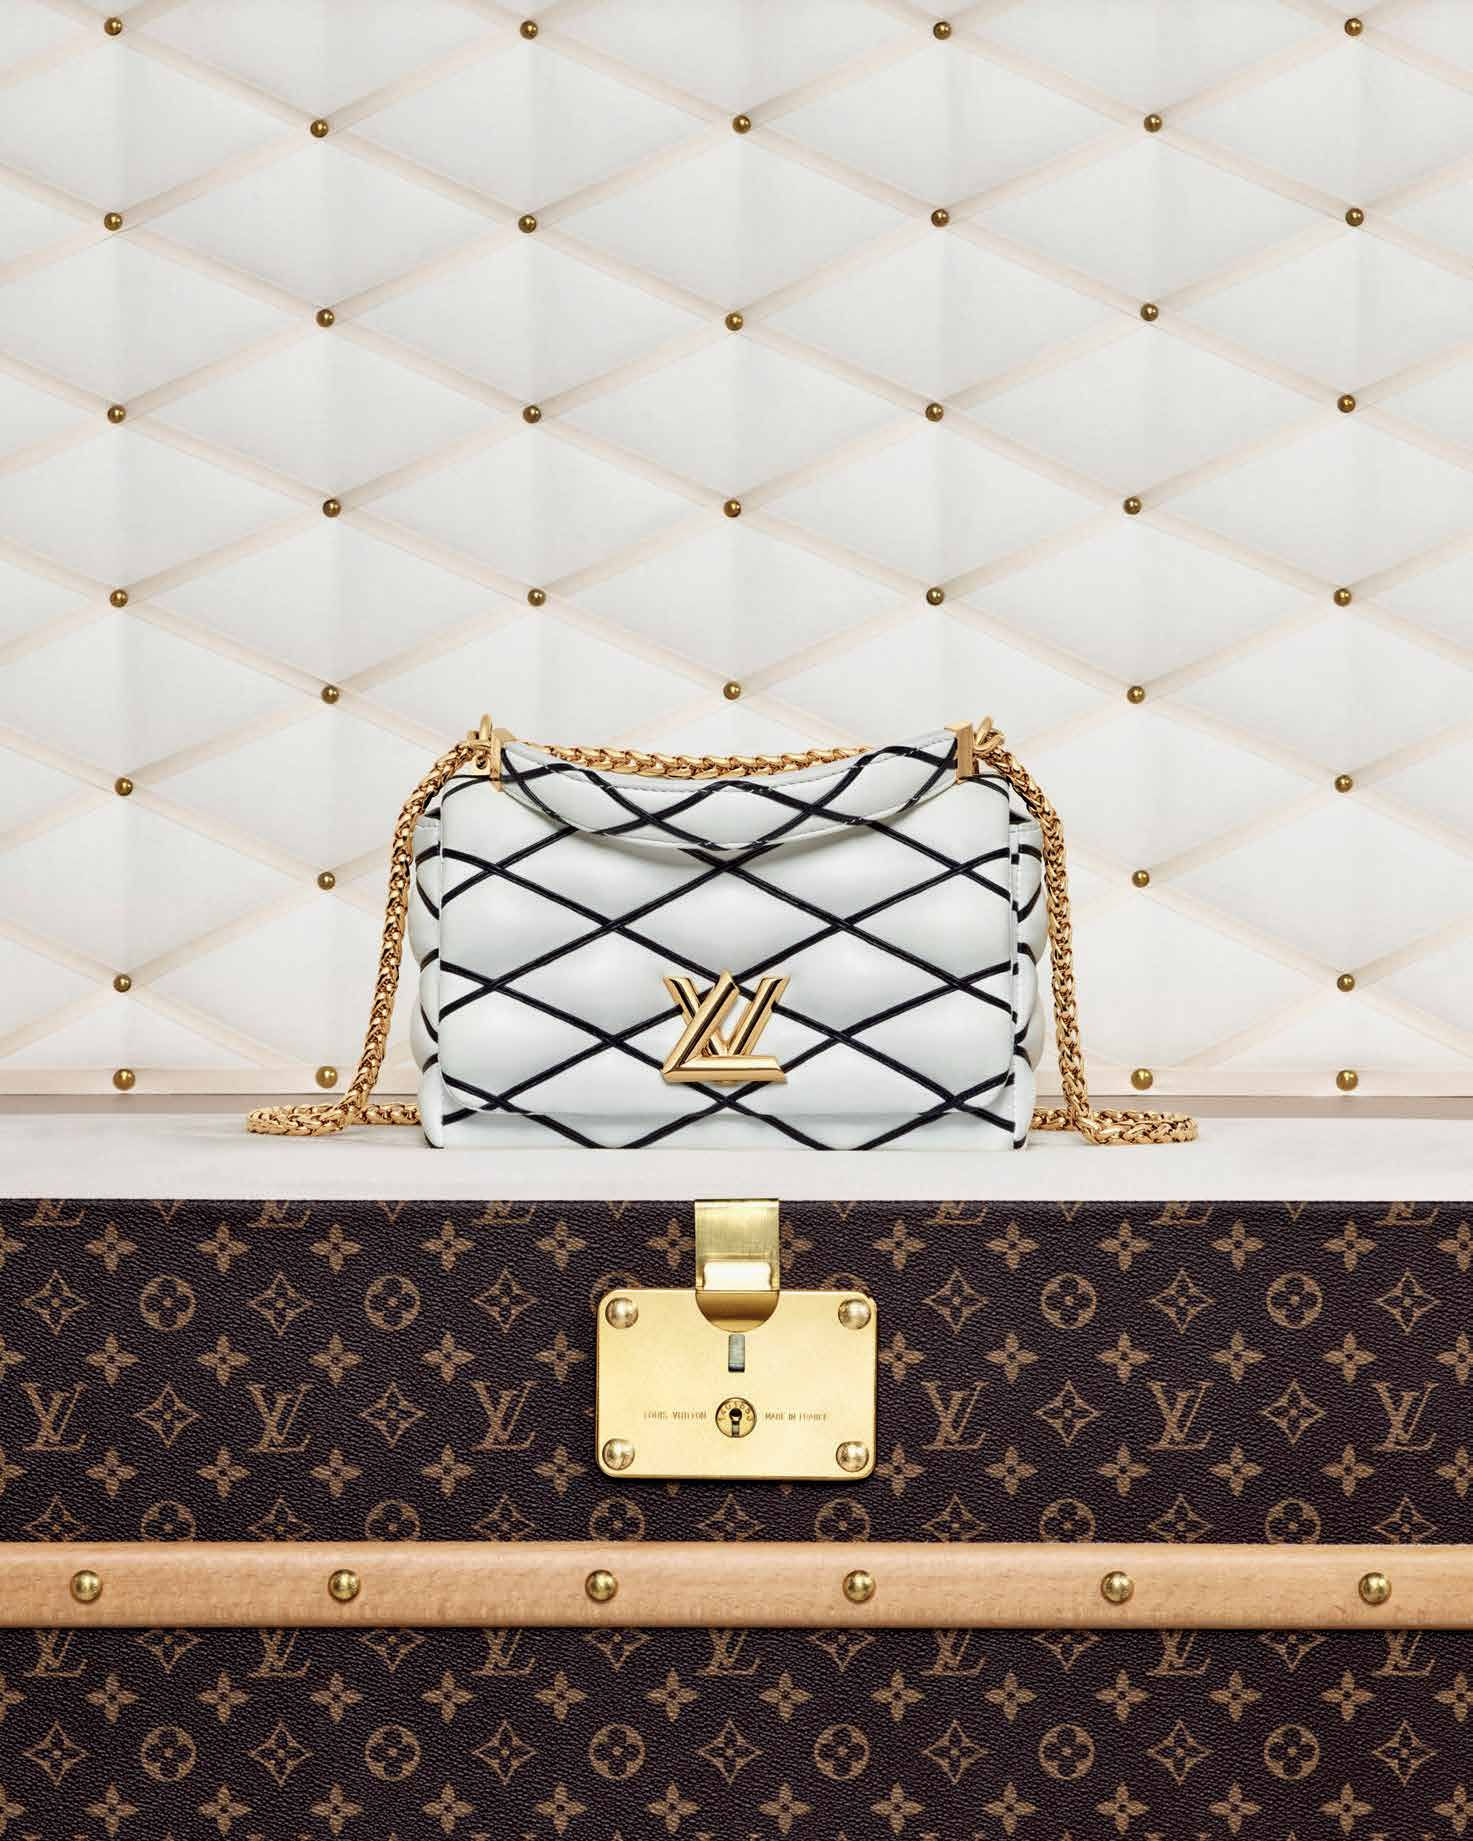 LVMH - Discover the second collection of Louis Vuitton bags and